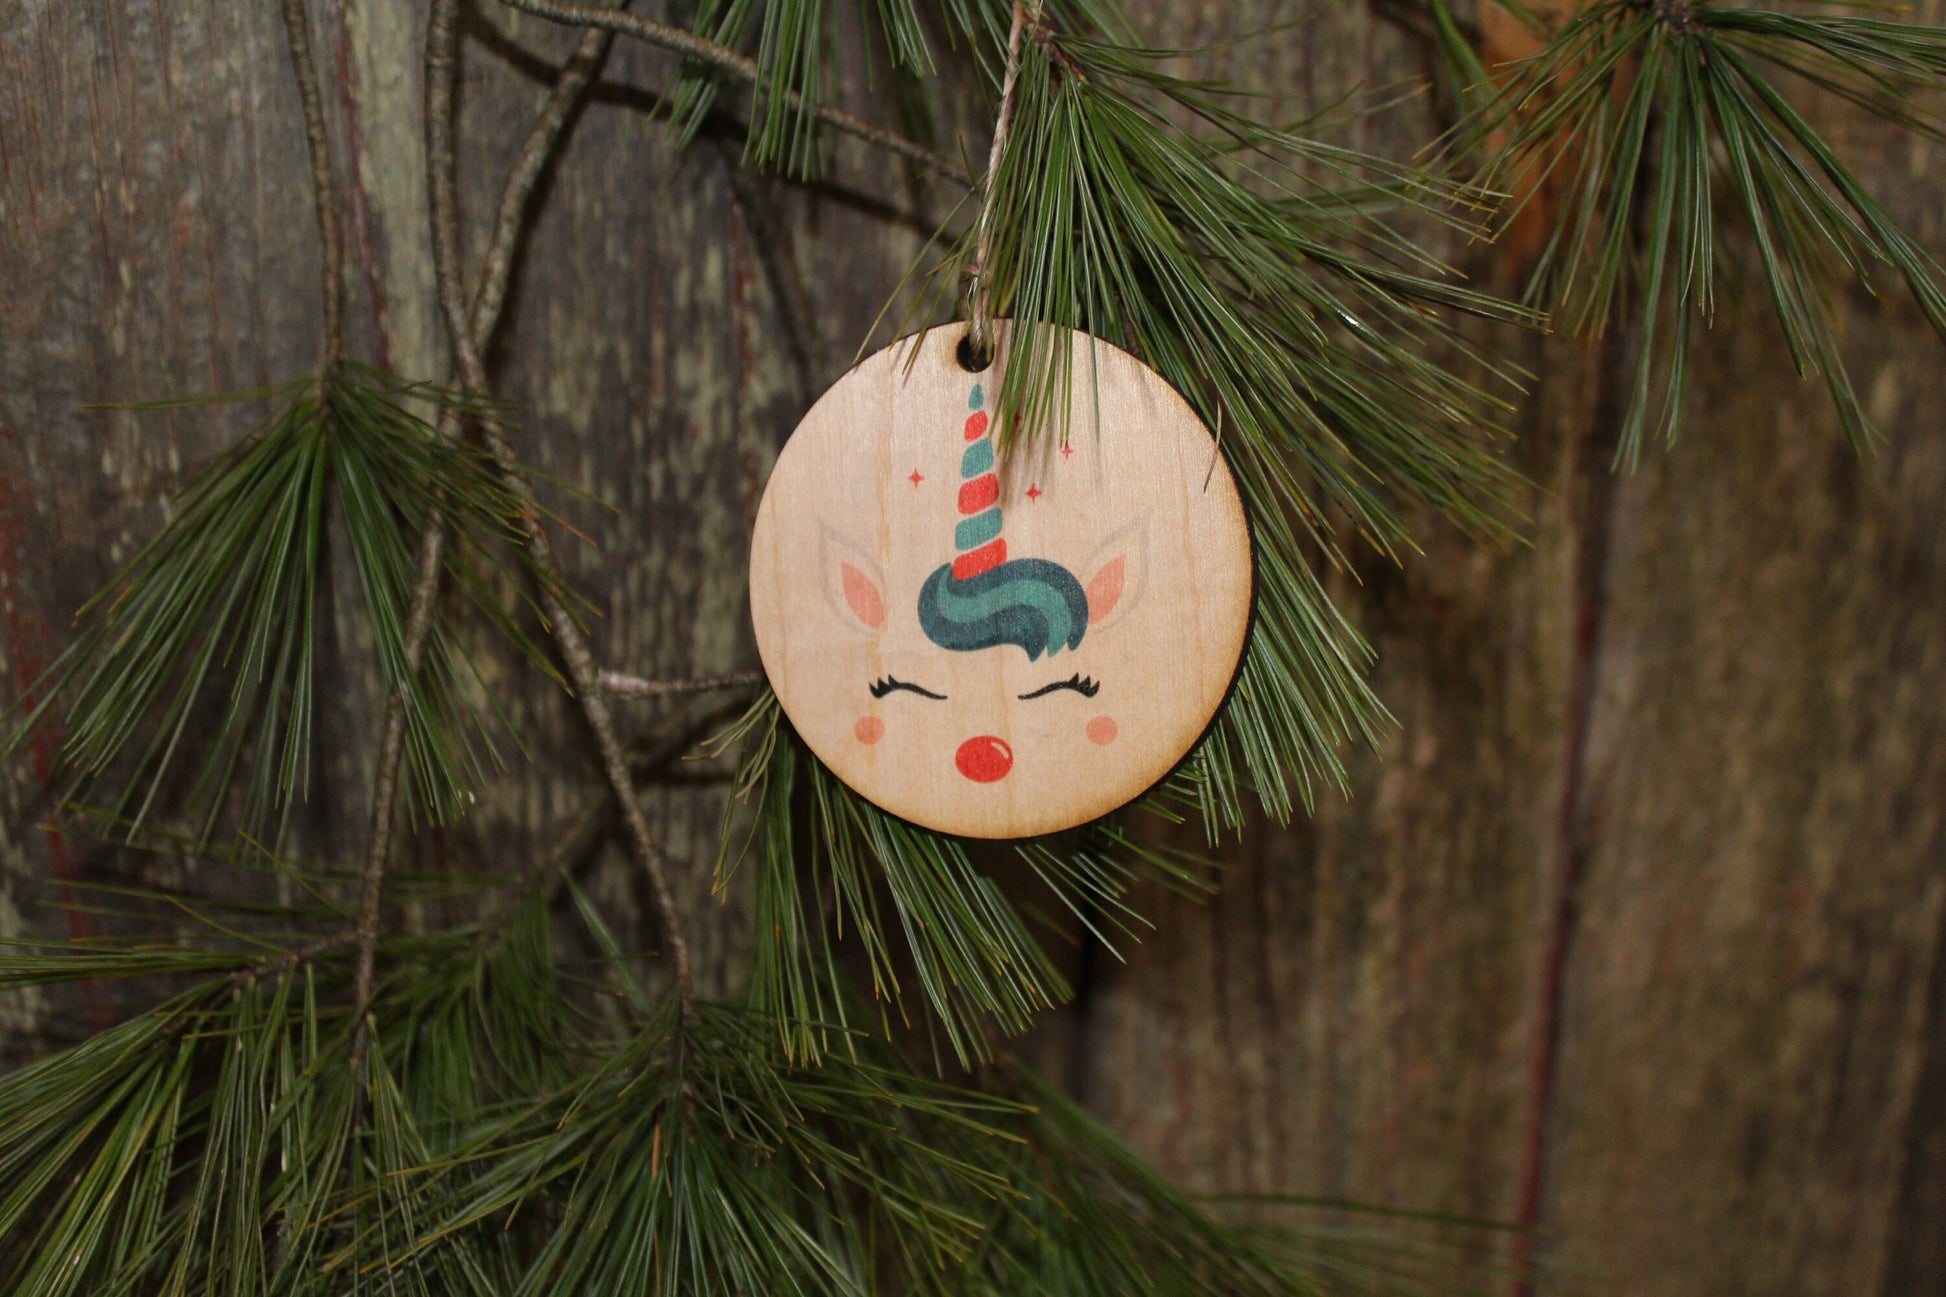 Set of 3 Unicorn Face Ornament Rudolph Red Nose Reindeer Wood Slice Horn Eyelashes Up-close Primitive Christmas Ornament Rustic Tree Printed